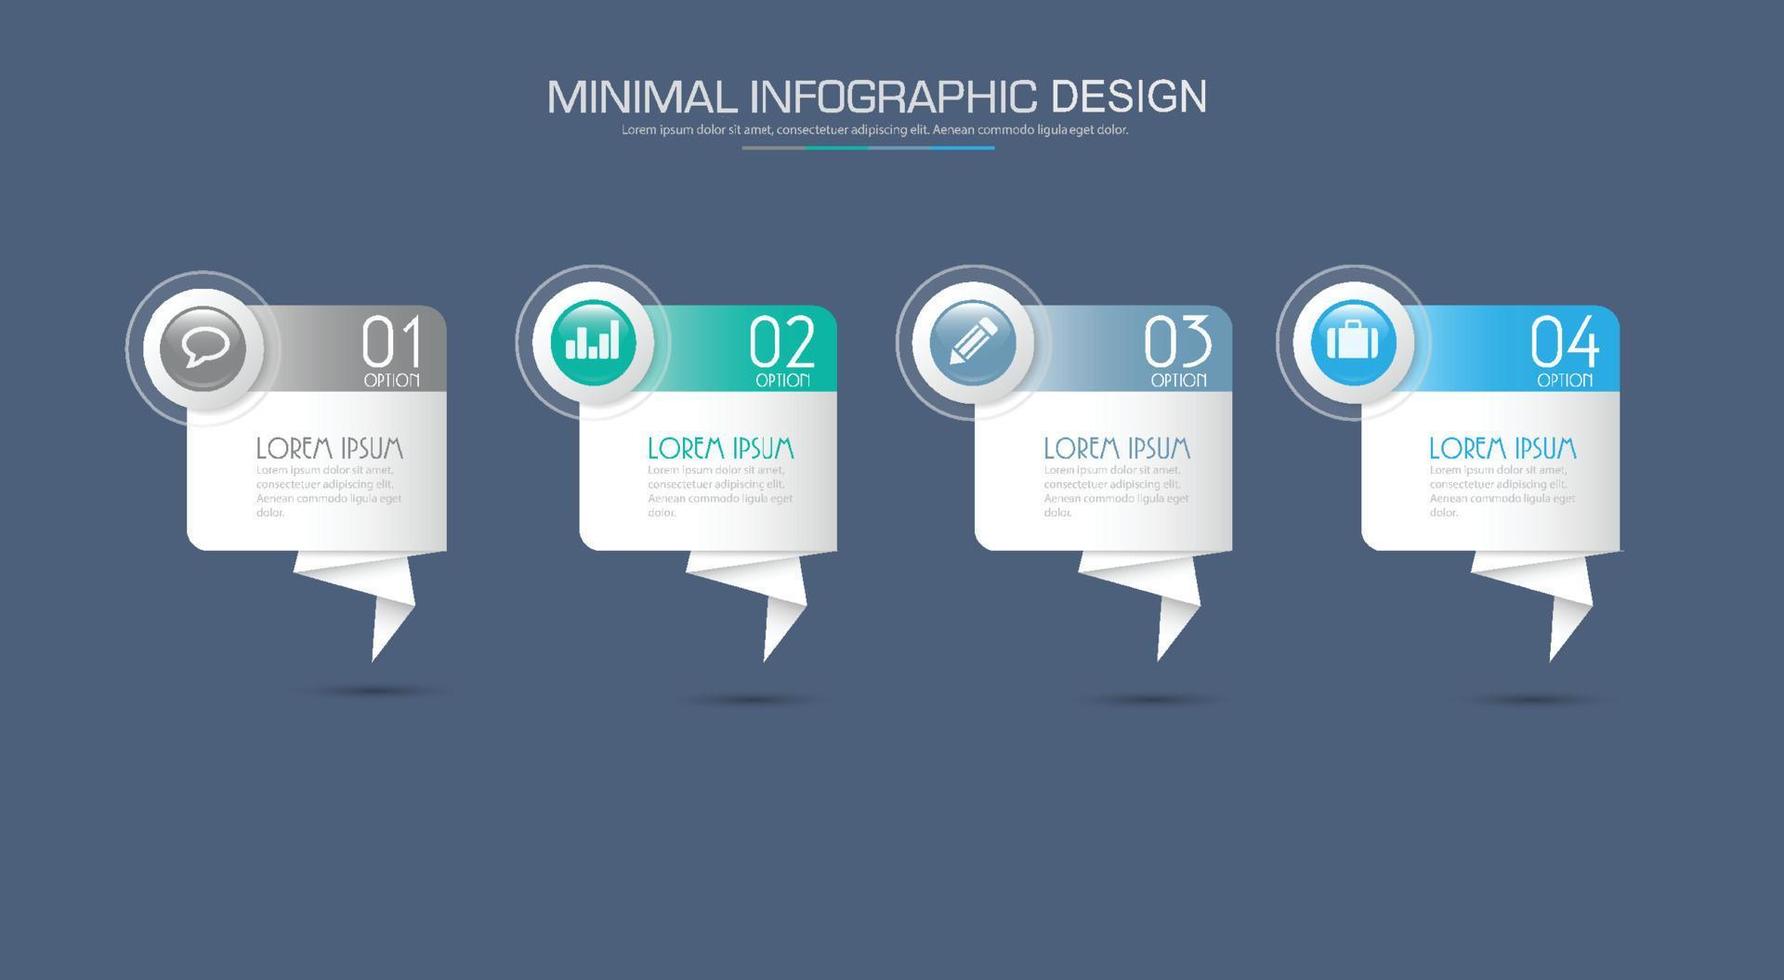 Business infographic template  with icon ,vector design illustrationS vector